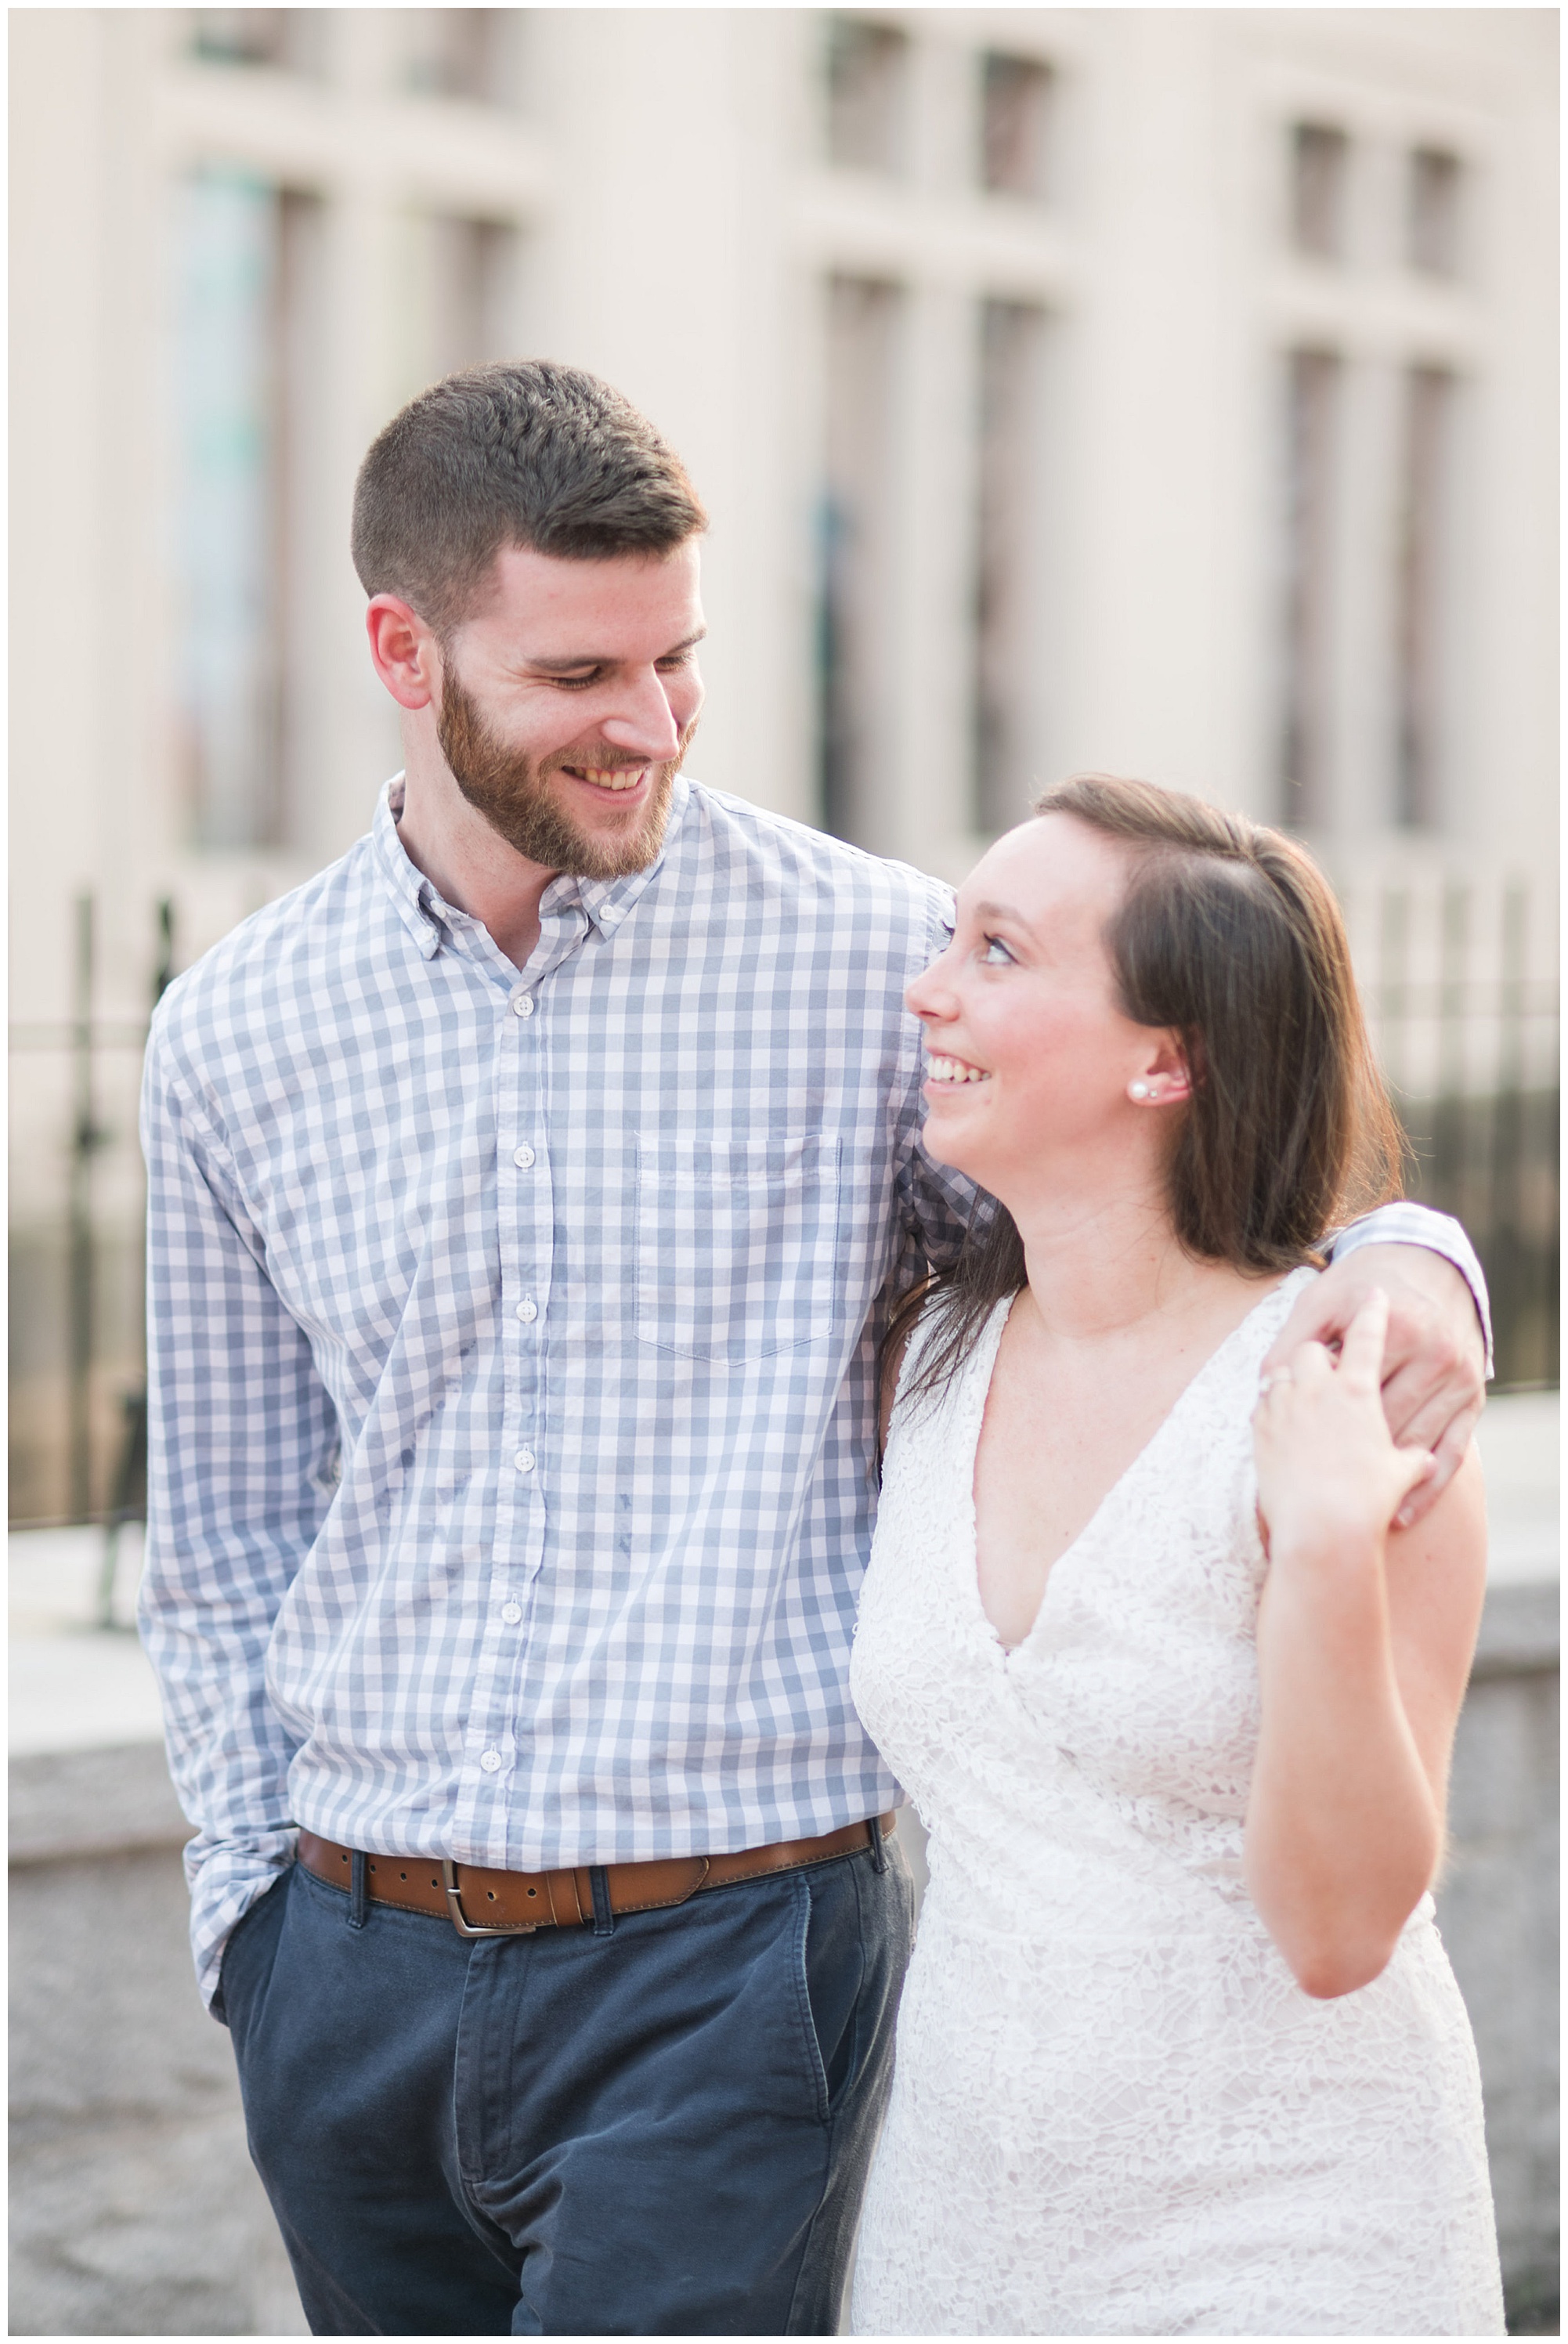 spring engagement photos in richmond virginia by the james river and canal walk